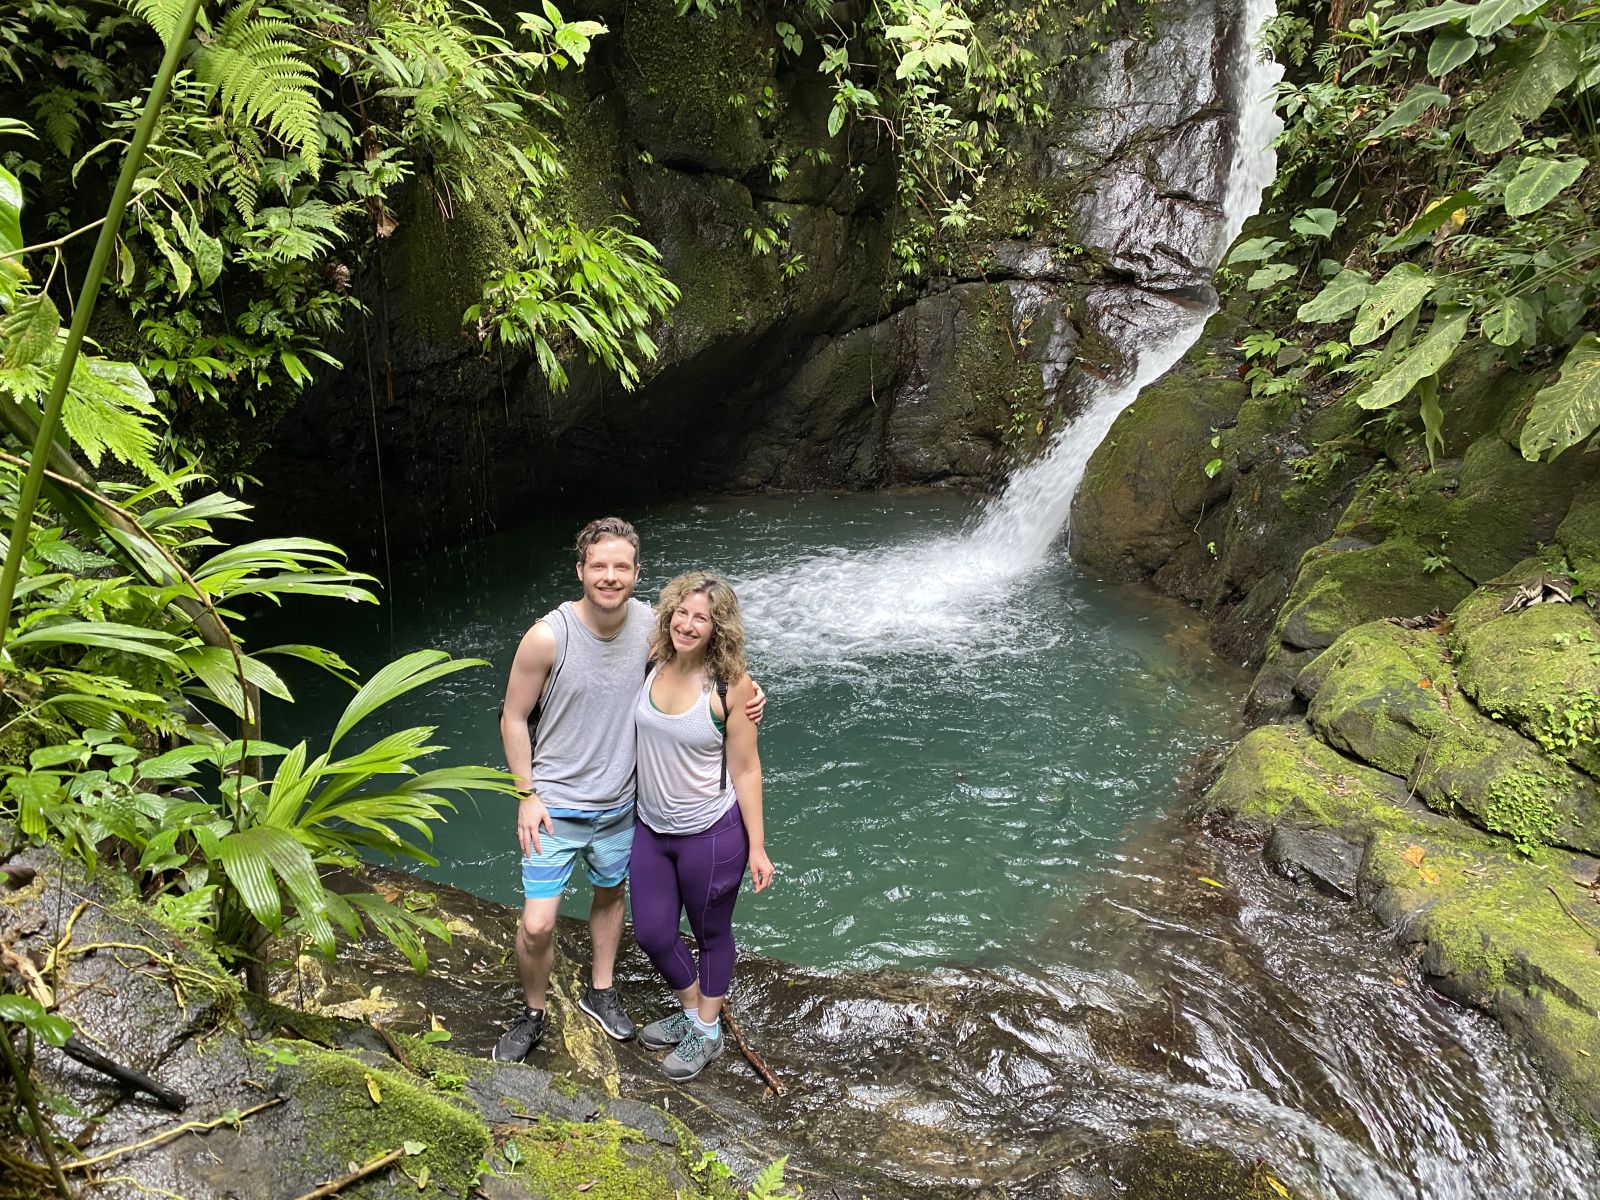 Couple next to a Waterfall, Hacienda Ébano, a Nature Reserve and Farm with Rainforest and Waterfalls at Barú, Costa Rica